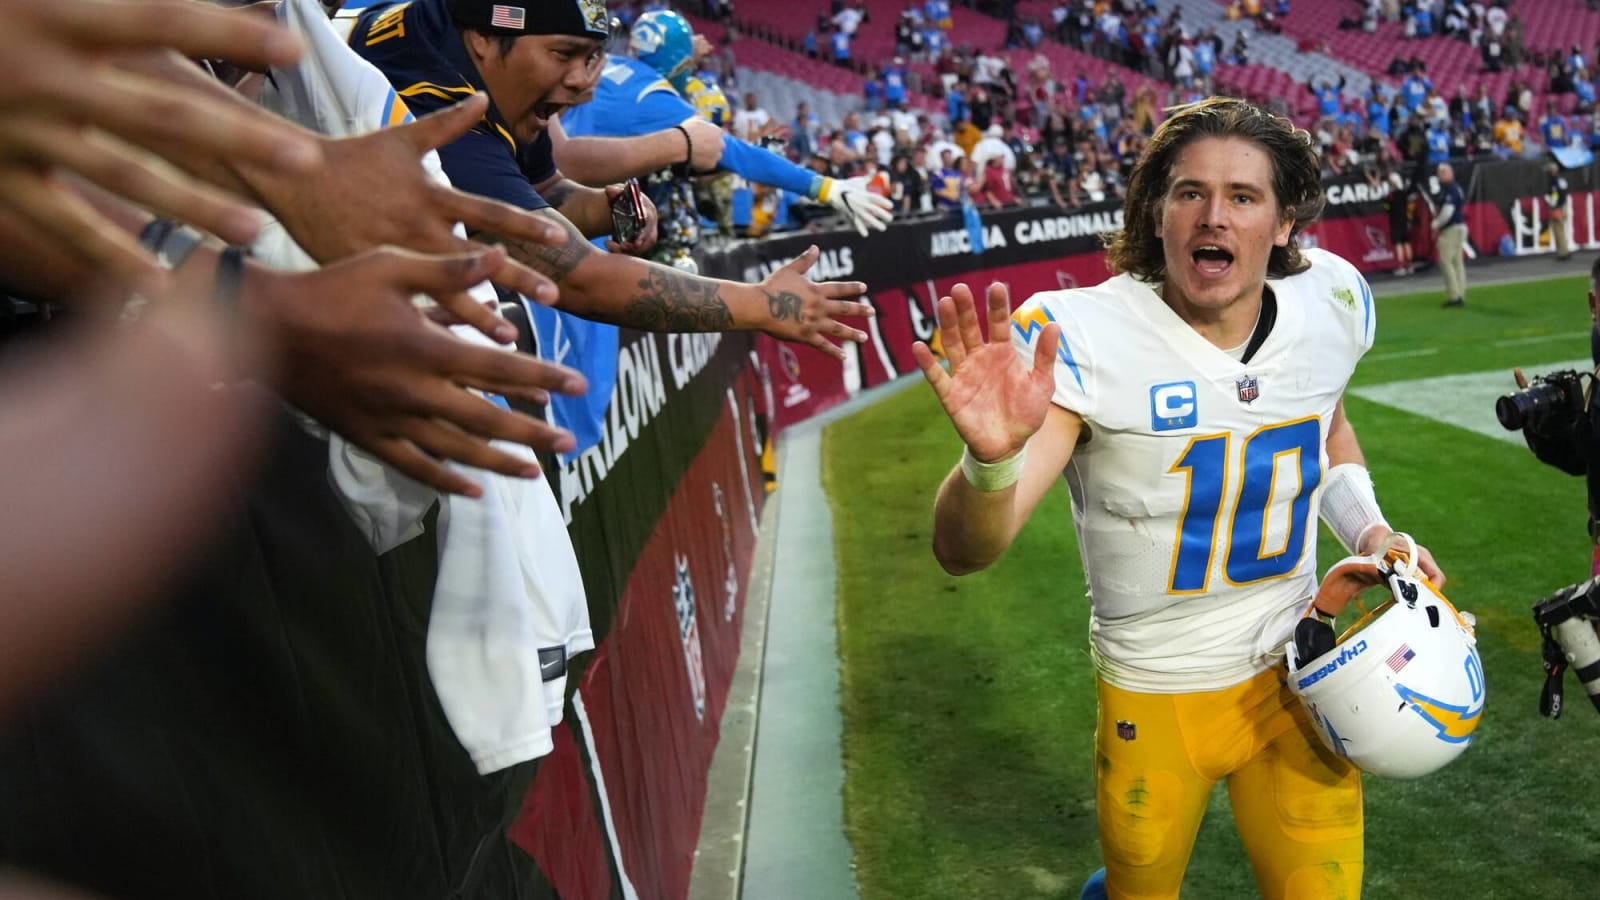 The Los Angeles Chargers Need To Find a Way Into the Playoffs